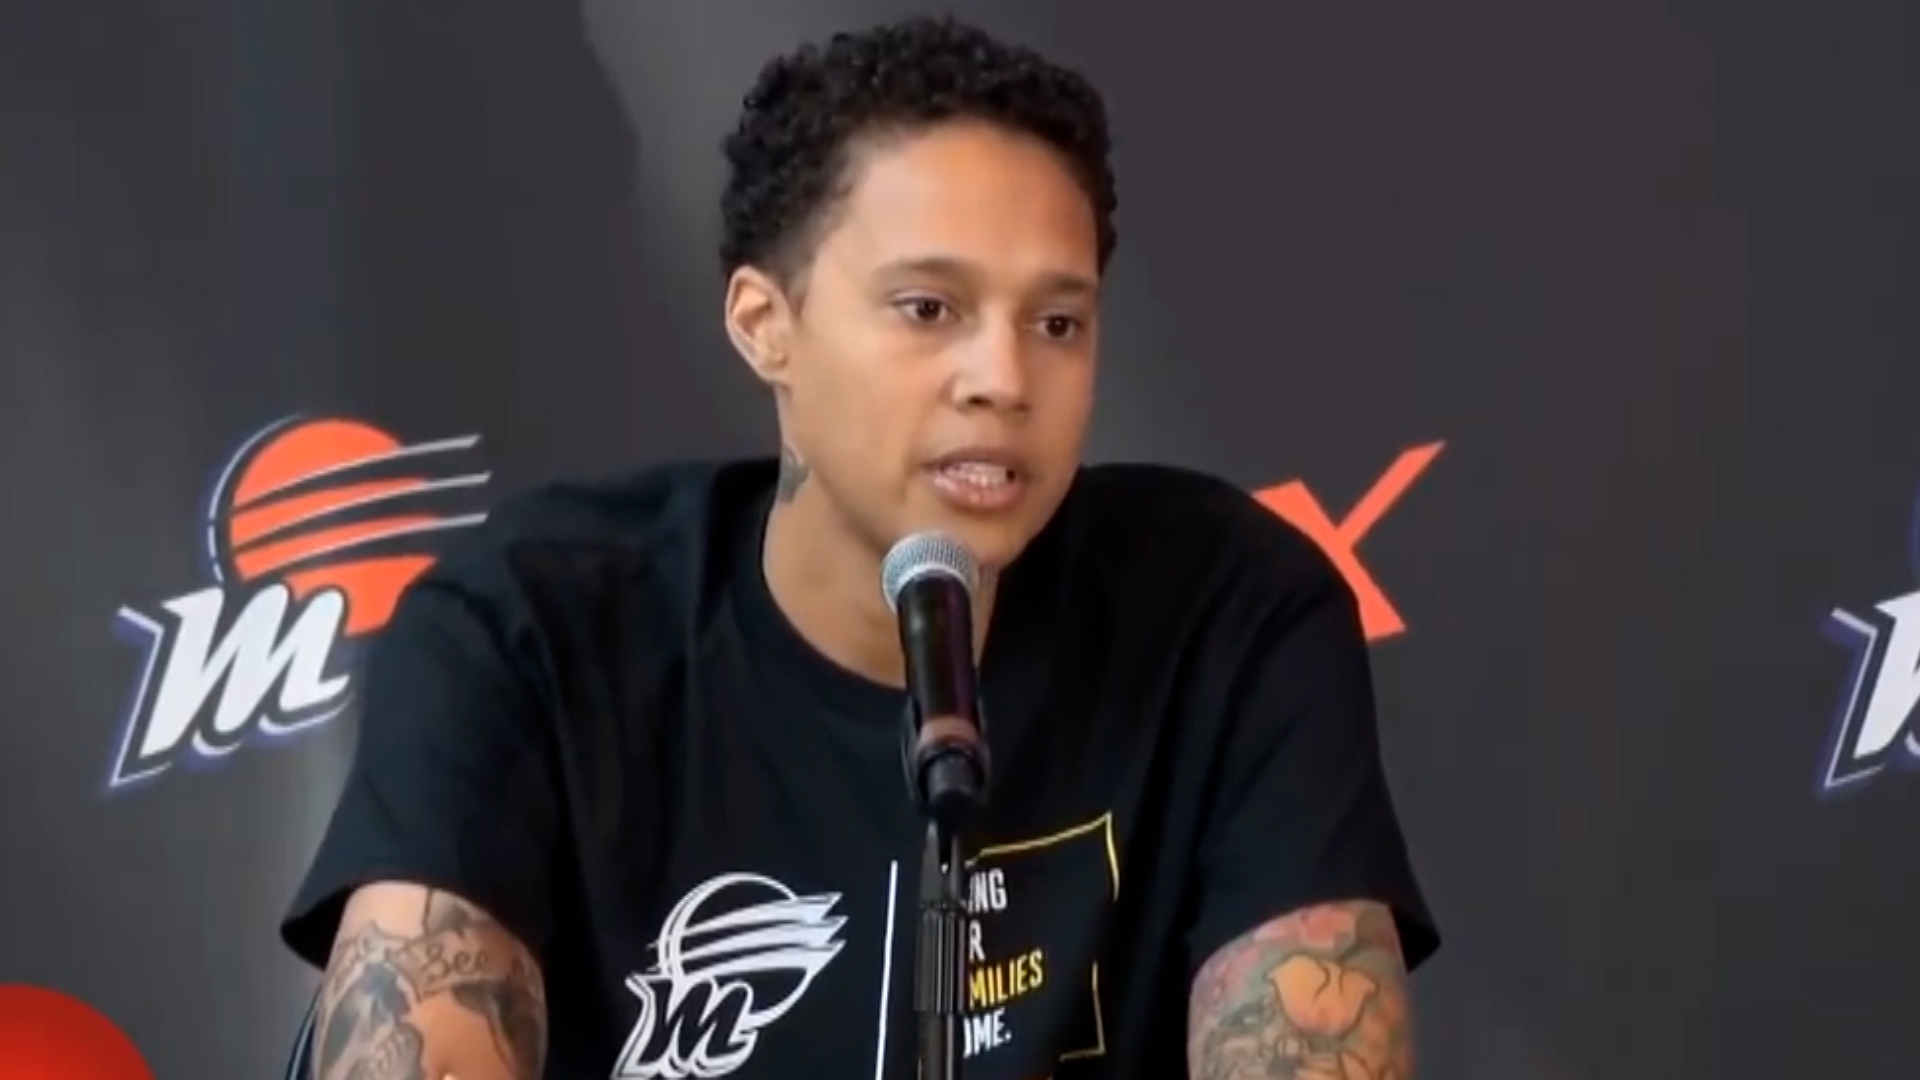 Brittney Griner defends transgender participation in women's sports: "It's a crime to separate them"